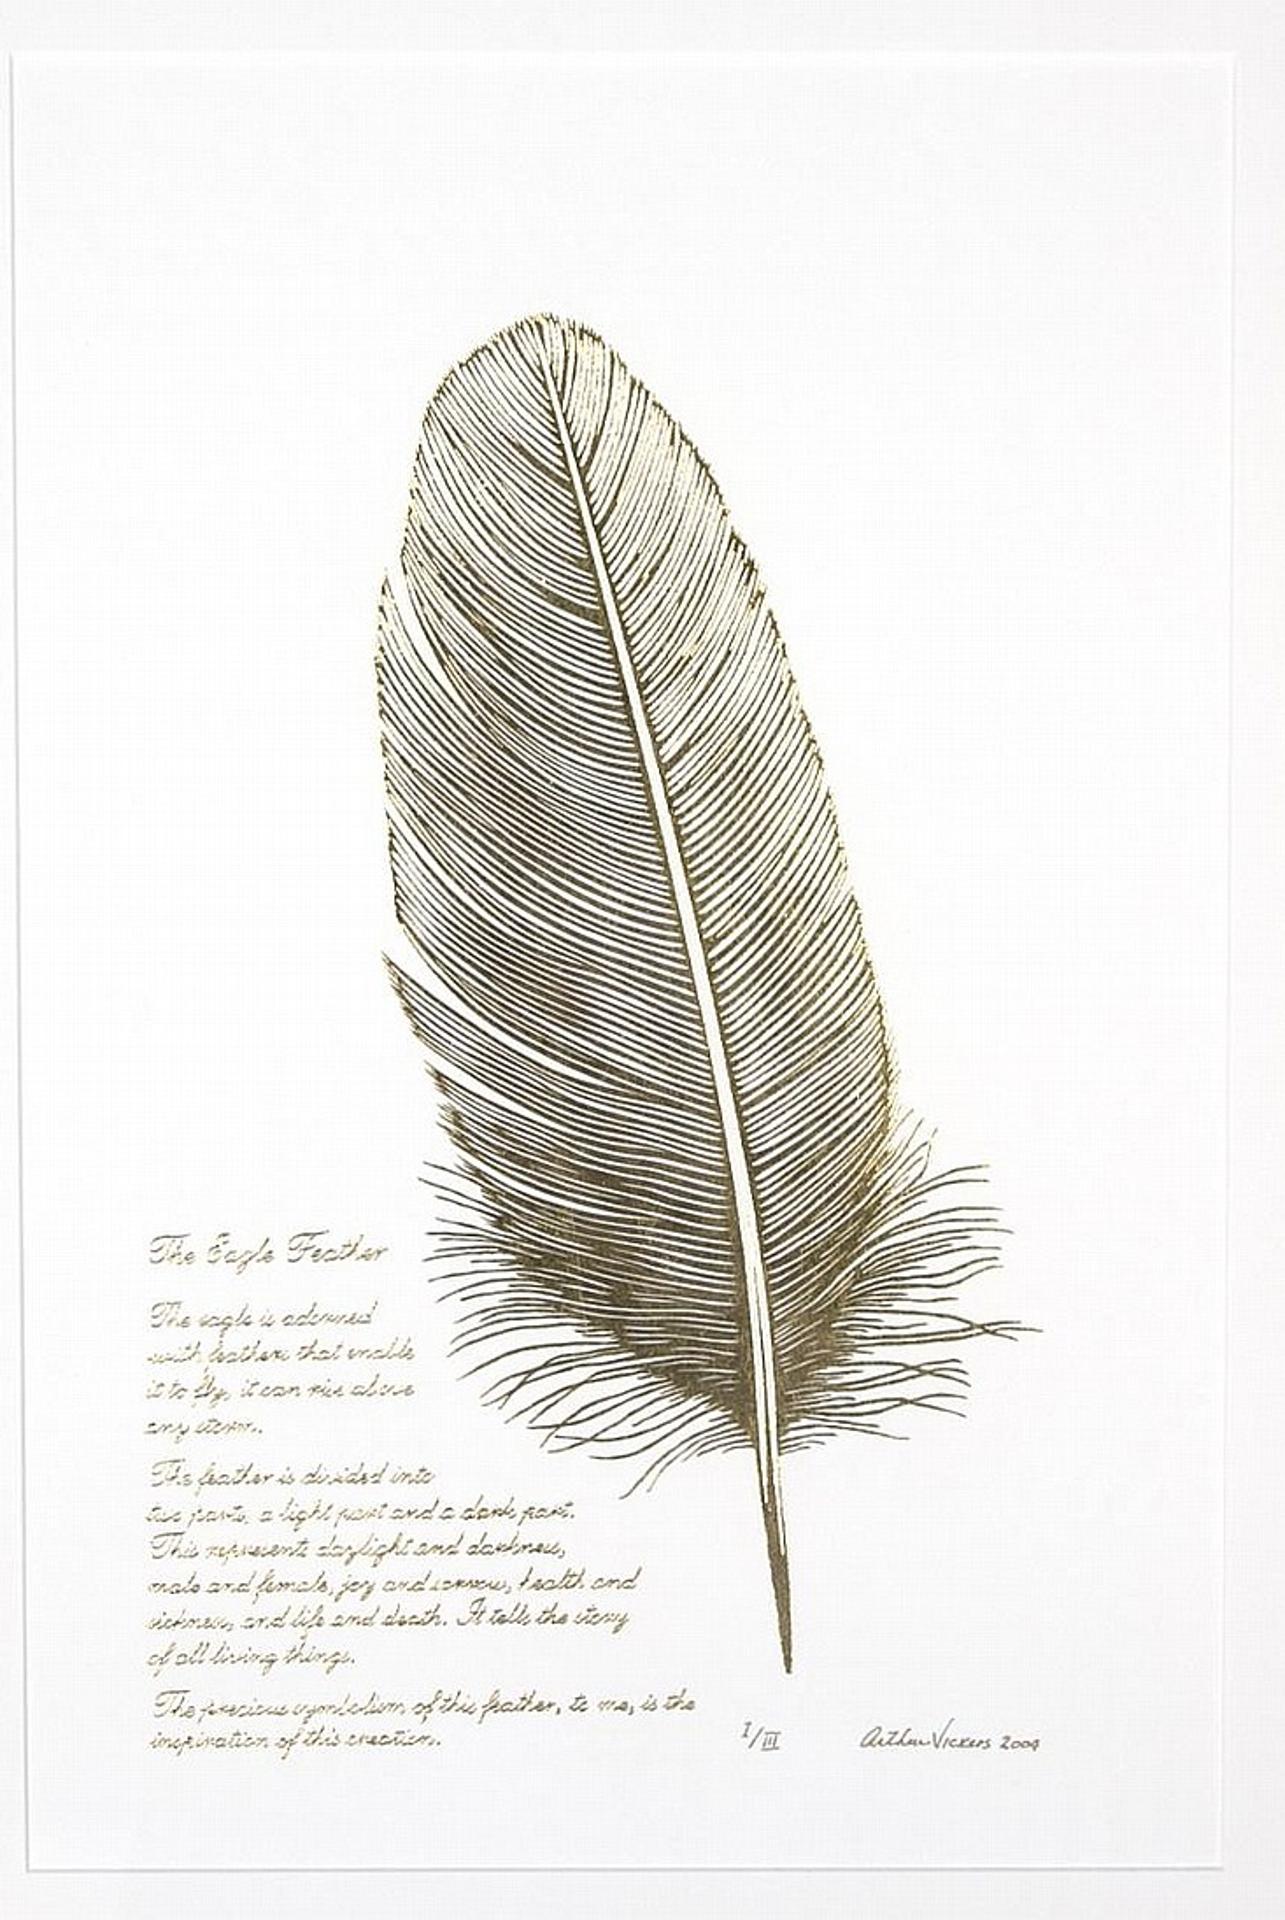 Arthur Vickers (1947) - The Eagle Feather